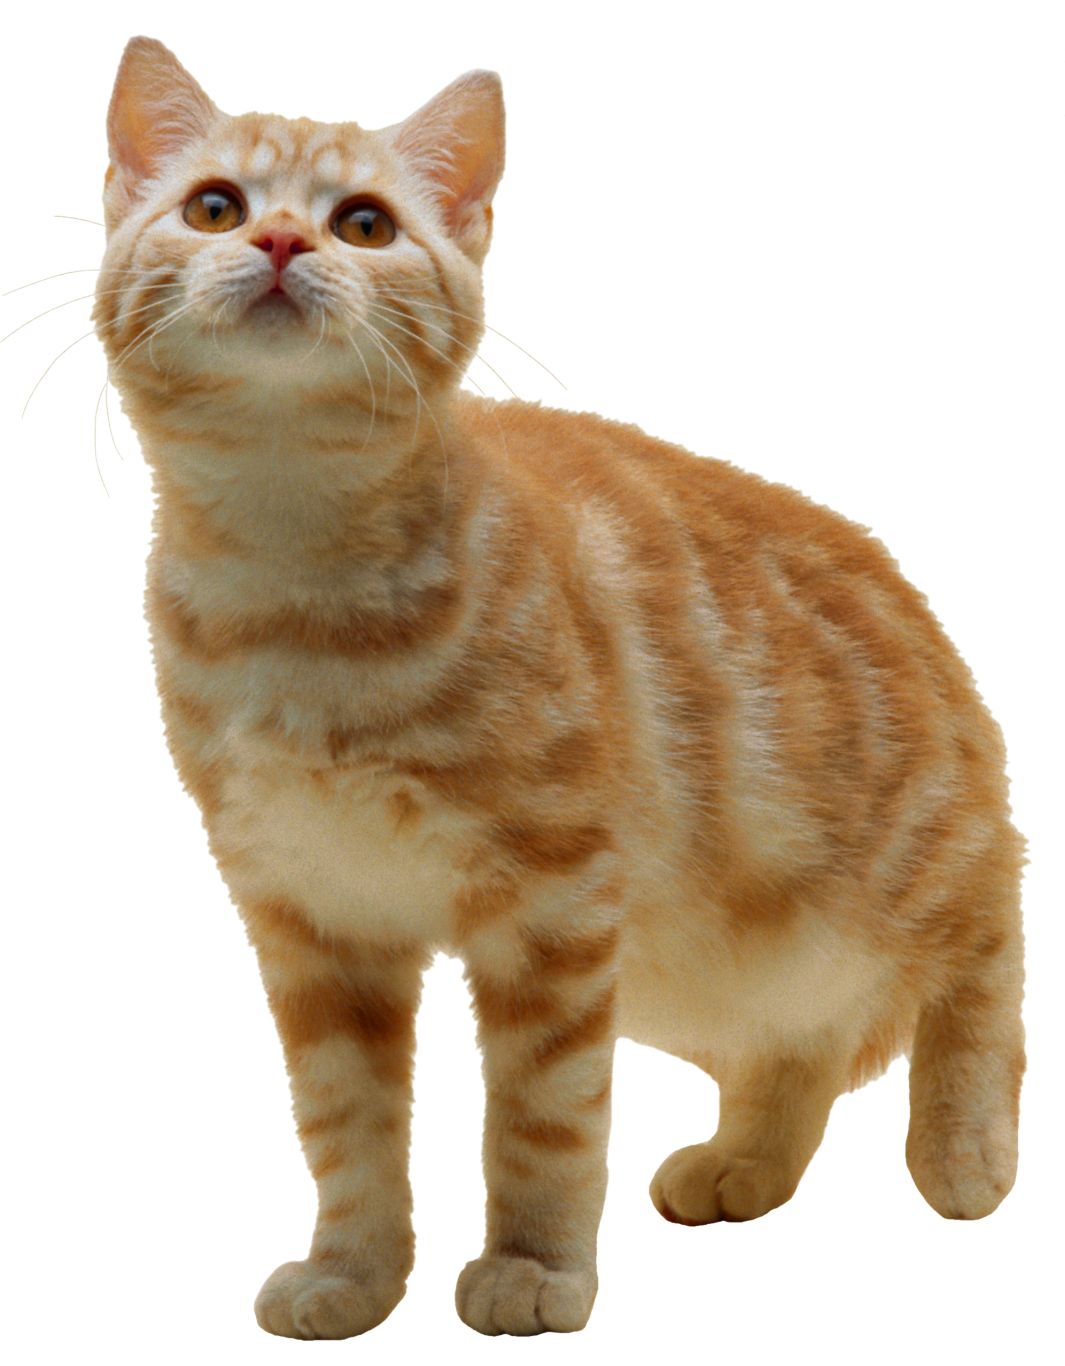 cat png image, free download picture, kitten    图片编号:100